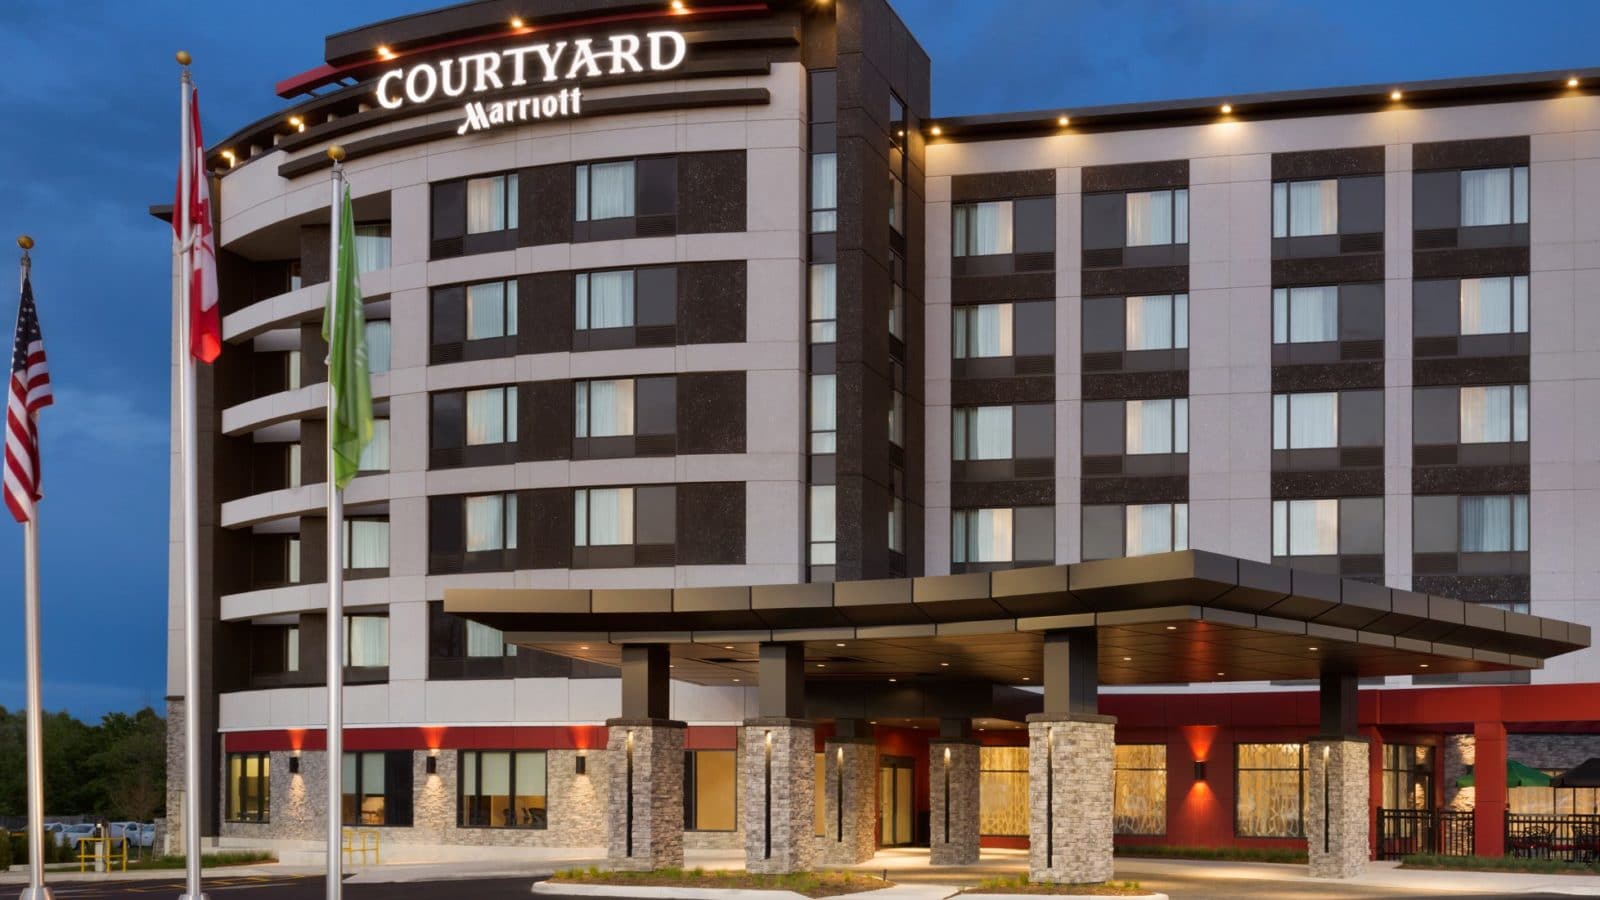 Marriott Corporate Codes - Save Big with These Codes!